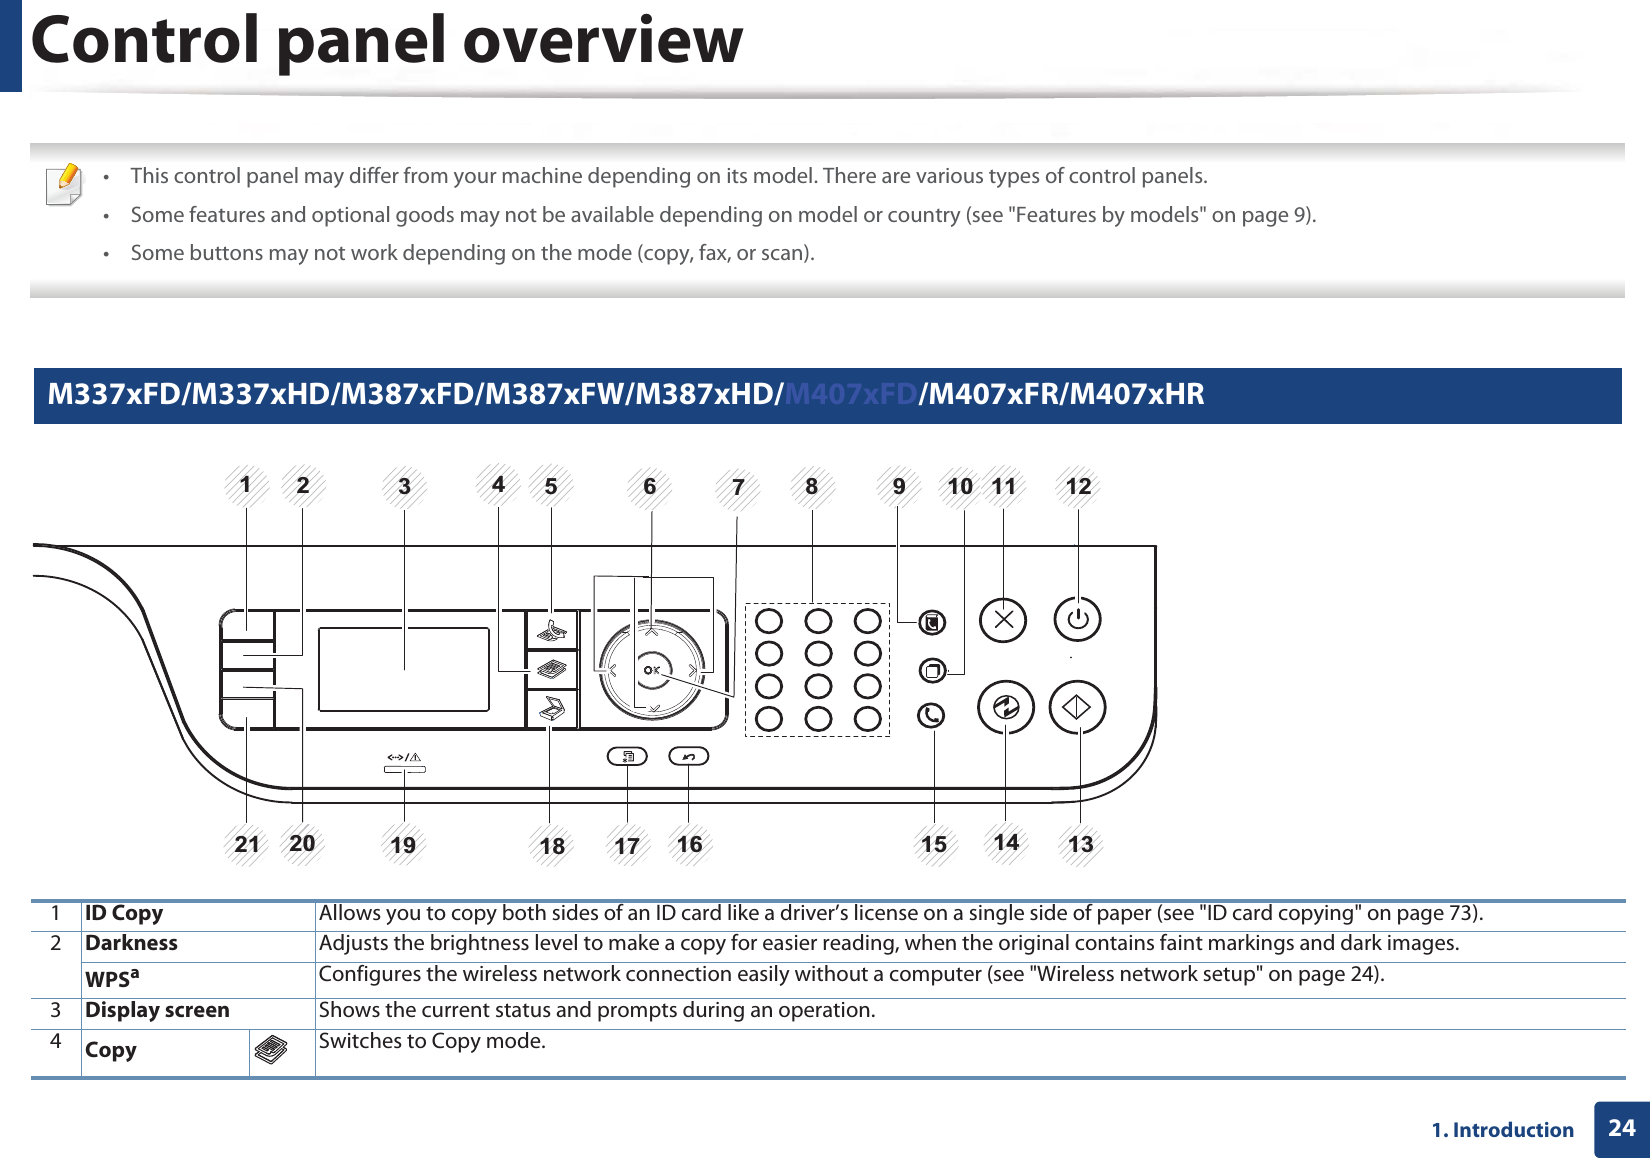 241. IntroductionControl panel overview • This control panel may differ from your machine depending on its model. There are various types of control panels.• Some features and optional goods may not be available depending on model or country (see &quot;Features by models&quot; on page 9).• Some buttons may not work depending on the mode (copy, fax, or scan). 12 M337xFD/M337xHD/M387xFD/M387xFW/M387xHD/M407xFD/M407xFR/M407xHR 1ID Copy Allows you to copy both sides of an ID card like a driver’s license on a single side of paper (see &quot;ID card copying&quot; on page 73). 2Darkness Adjusts the brightness level to make a copy for easier reading, when the original contains faint markings and dark images.WPSaConfigures the wireless network connection easily without a computer (see &quot;Wireless network setup&quot; on page 24).3Display screen Shows the current status and prompts during an operation.4Copy Switches to Copy mode.1221345 6 78 9 10 1121 20 19 18 17 16 15 14 13